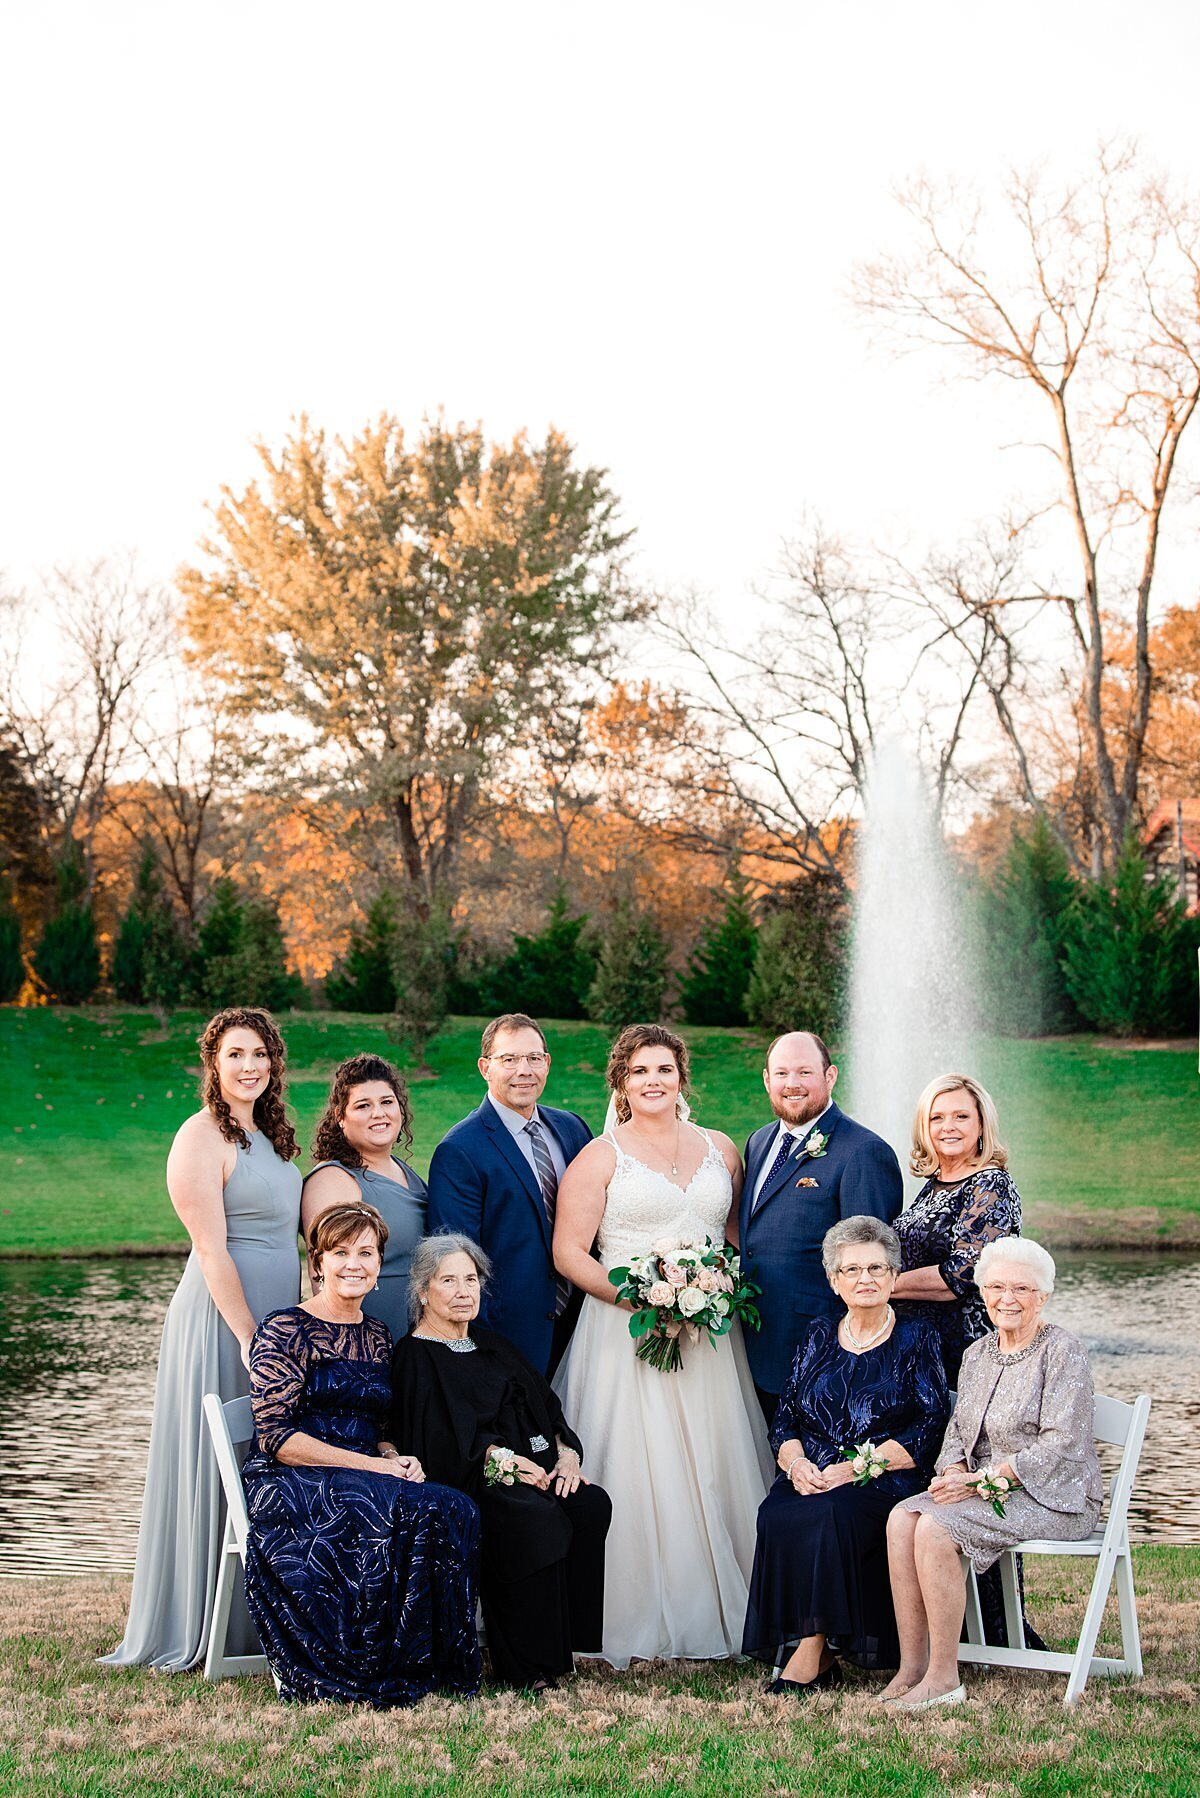 Bride in a sleeveless v-neck wedding dress and veil standing with the groom dressed in a navy blue suit with their family. The bridesmaids are dressed in a dusty gray blue. The mother of the bride and mother of the groom are dressed in midnight blue floor length dresses. The grandmothers of the of the bride and groom are dressed in navy blue and silver.